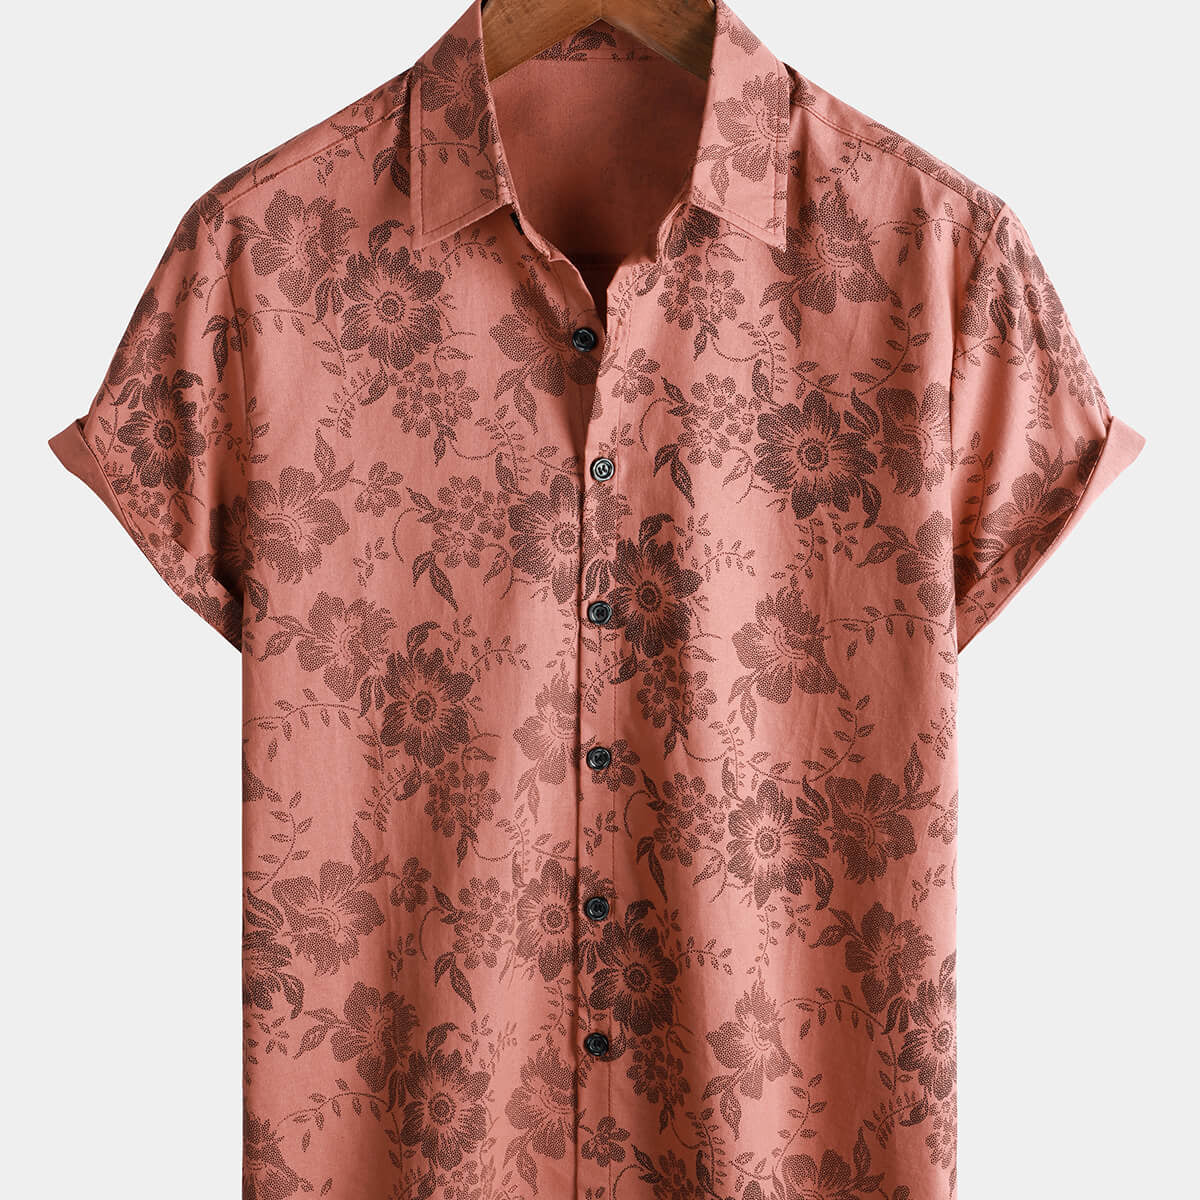 Men's Vacation Vintage Floral Print Cotton Linen Breathable Beach Short Sleeve Button Up Red Boho Shirt